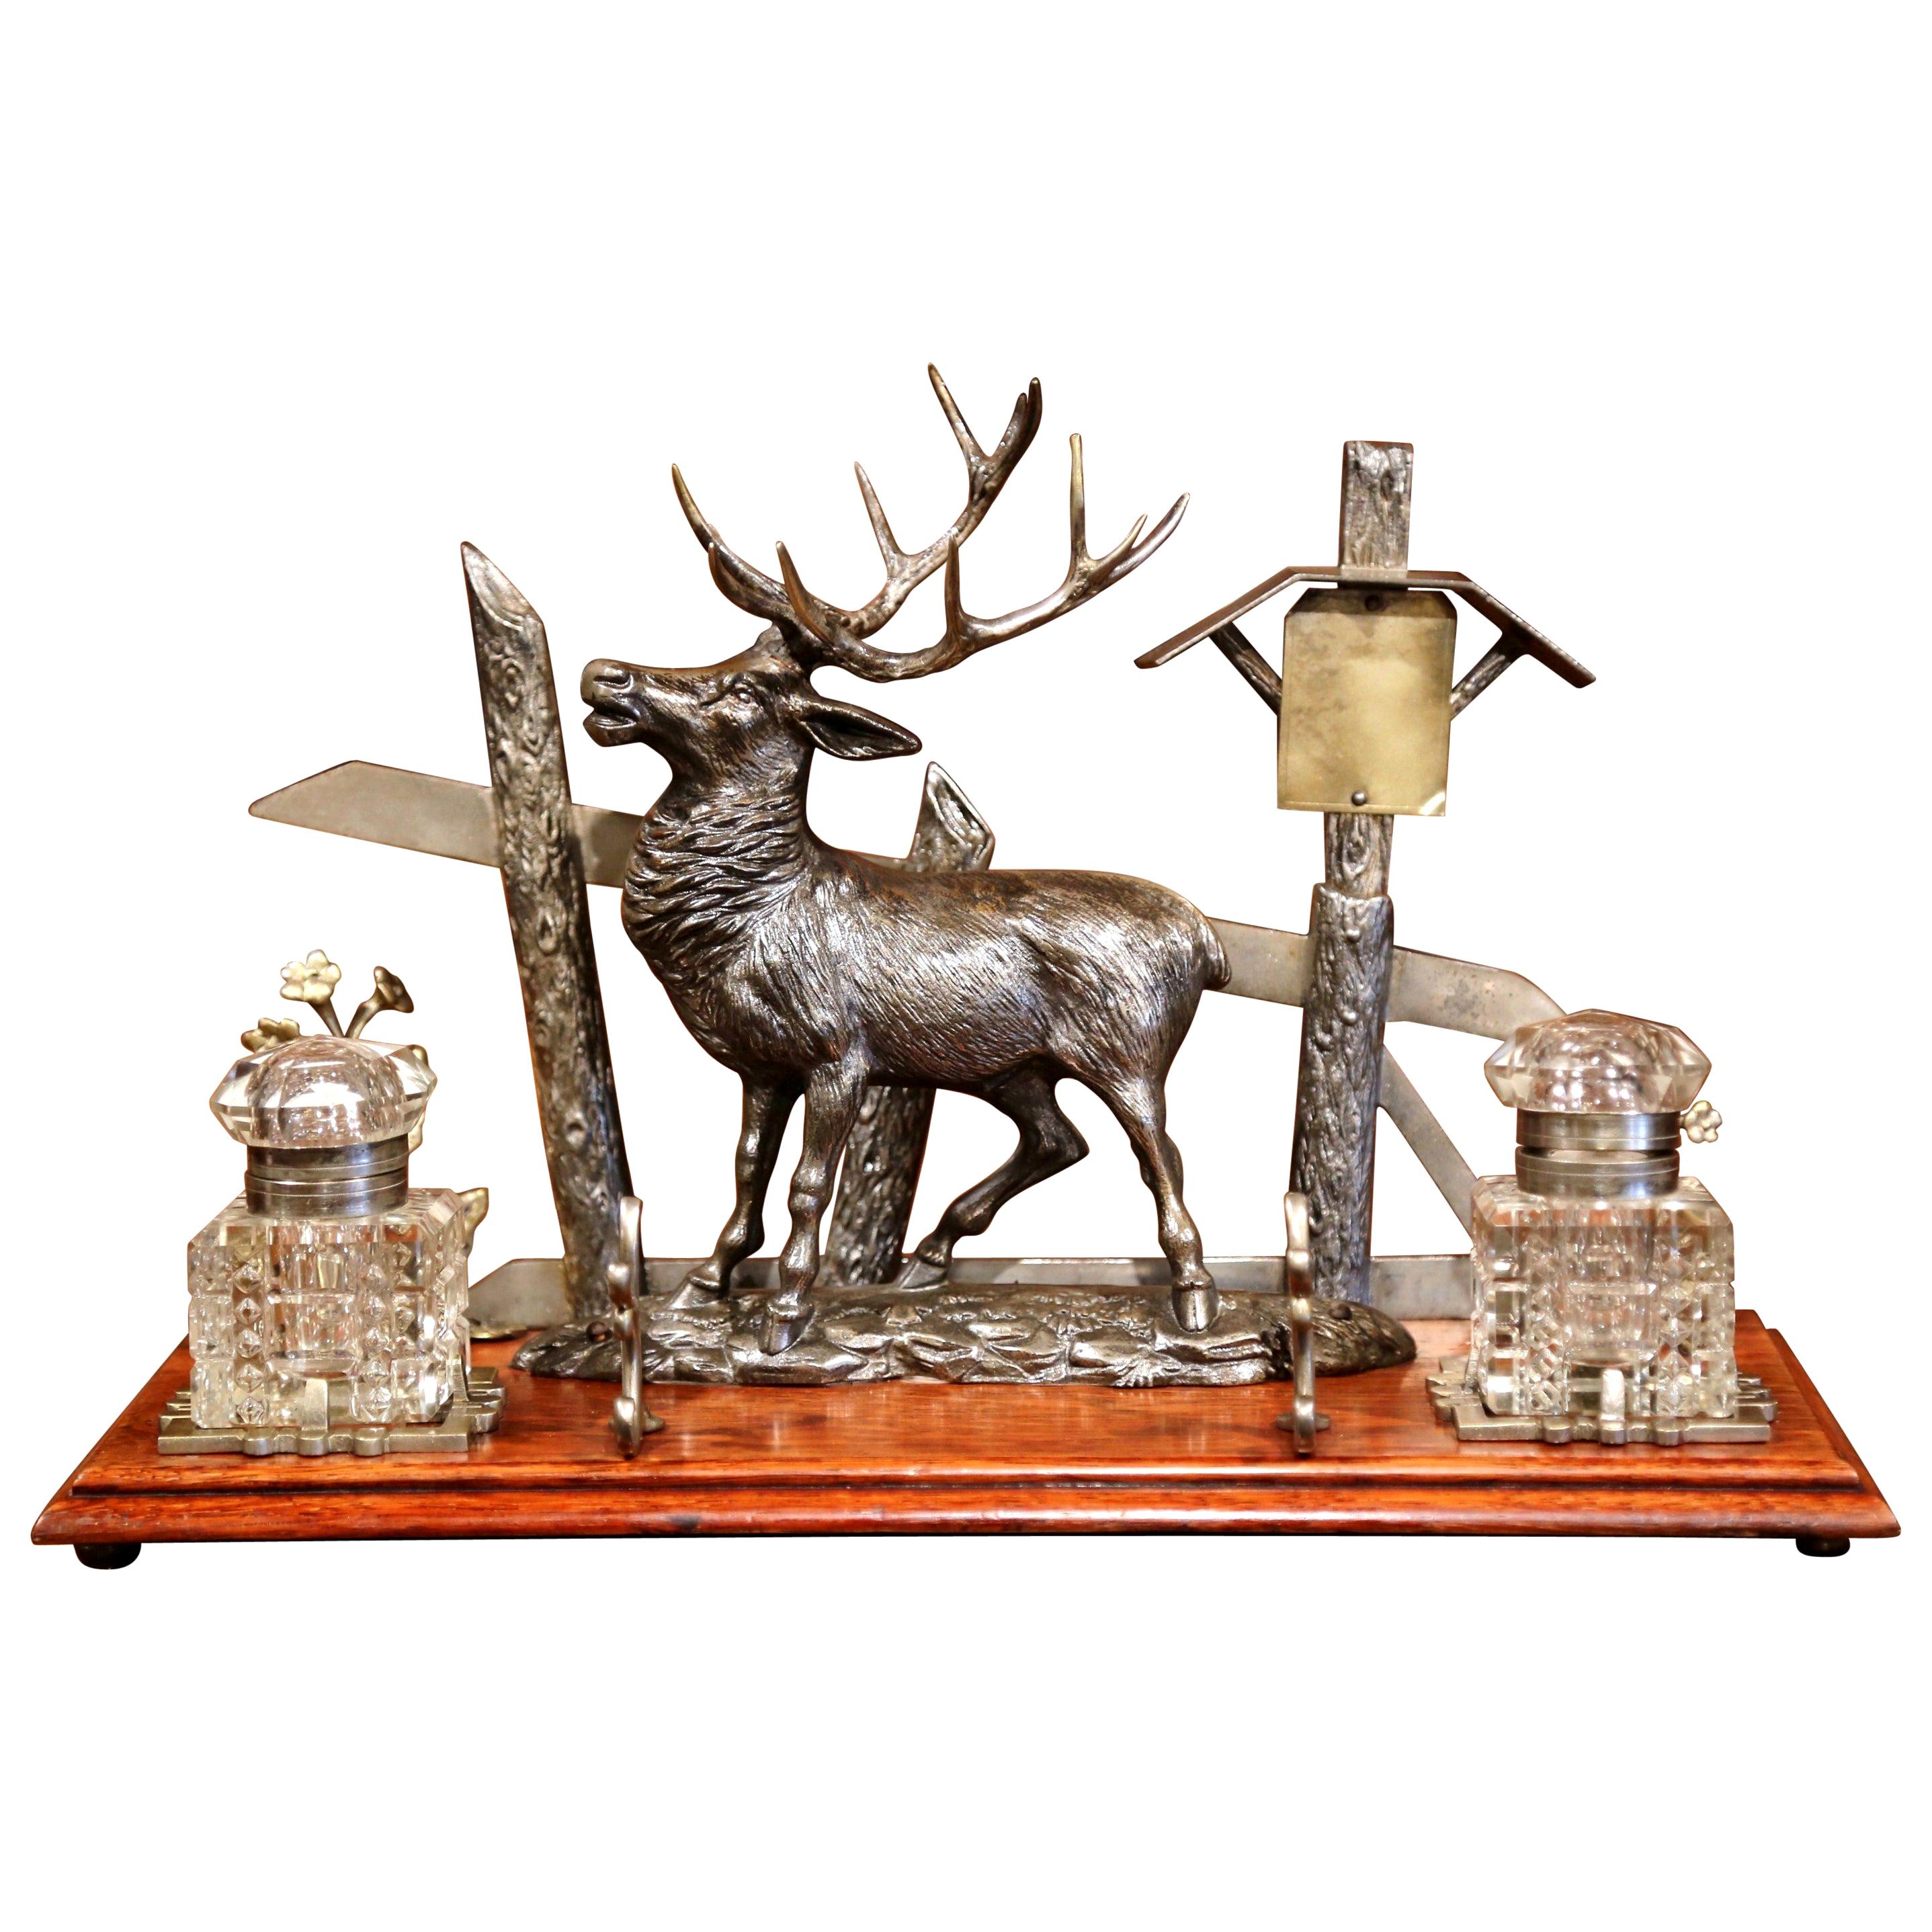 Mid-20th Century French Spelter and Cut Glass Inkwell with Deer Sculpture